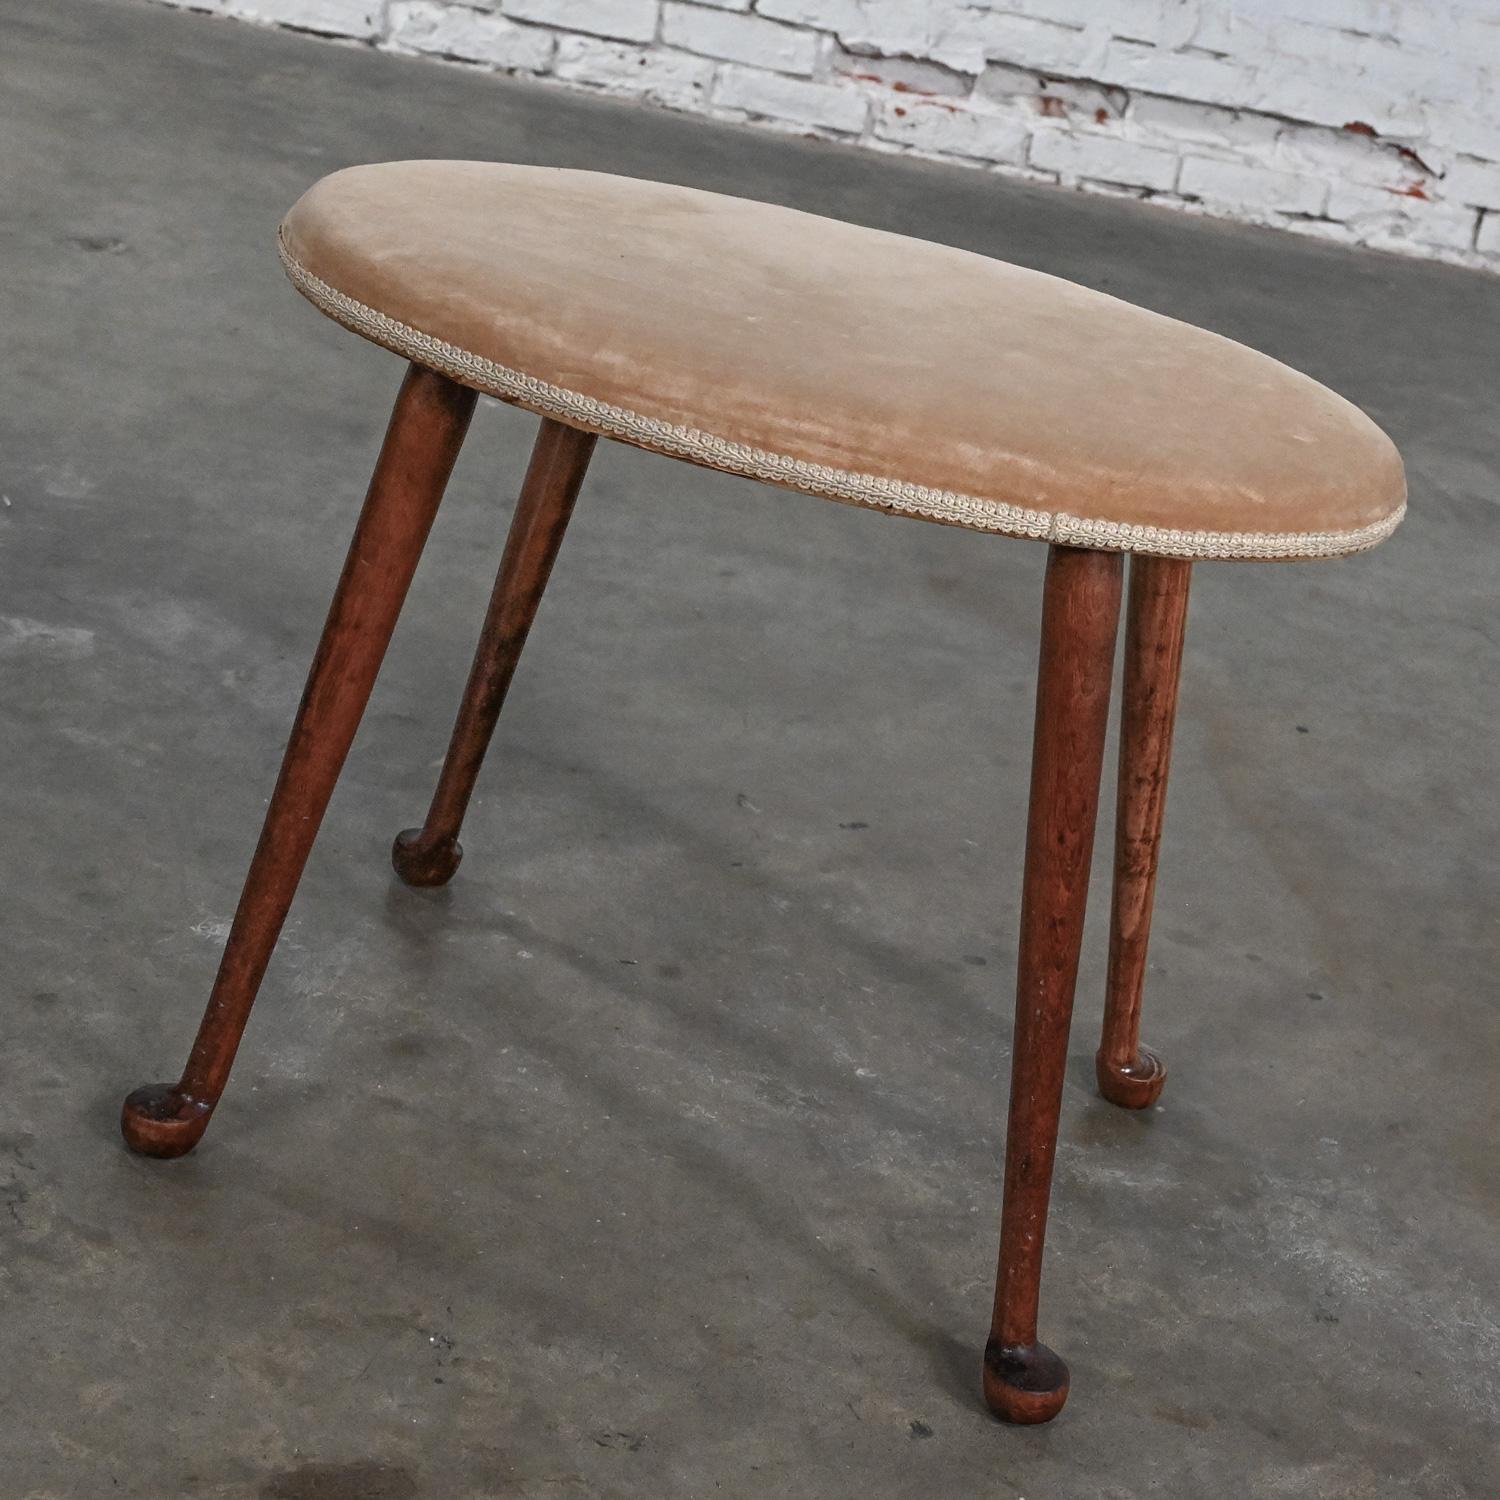 Handsome vintage Colonial style Conant Ball low stool with oval seat with vintage destressed tan velvet upholstery and maple splayed legs with ball feet. Beautiful condition, keeping in mind that this is vintage and not new so will have signs of use